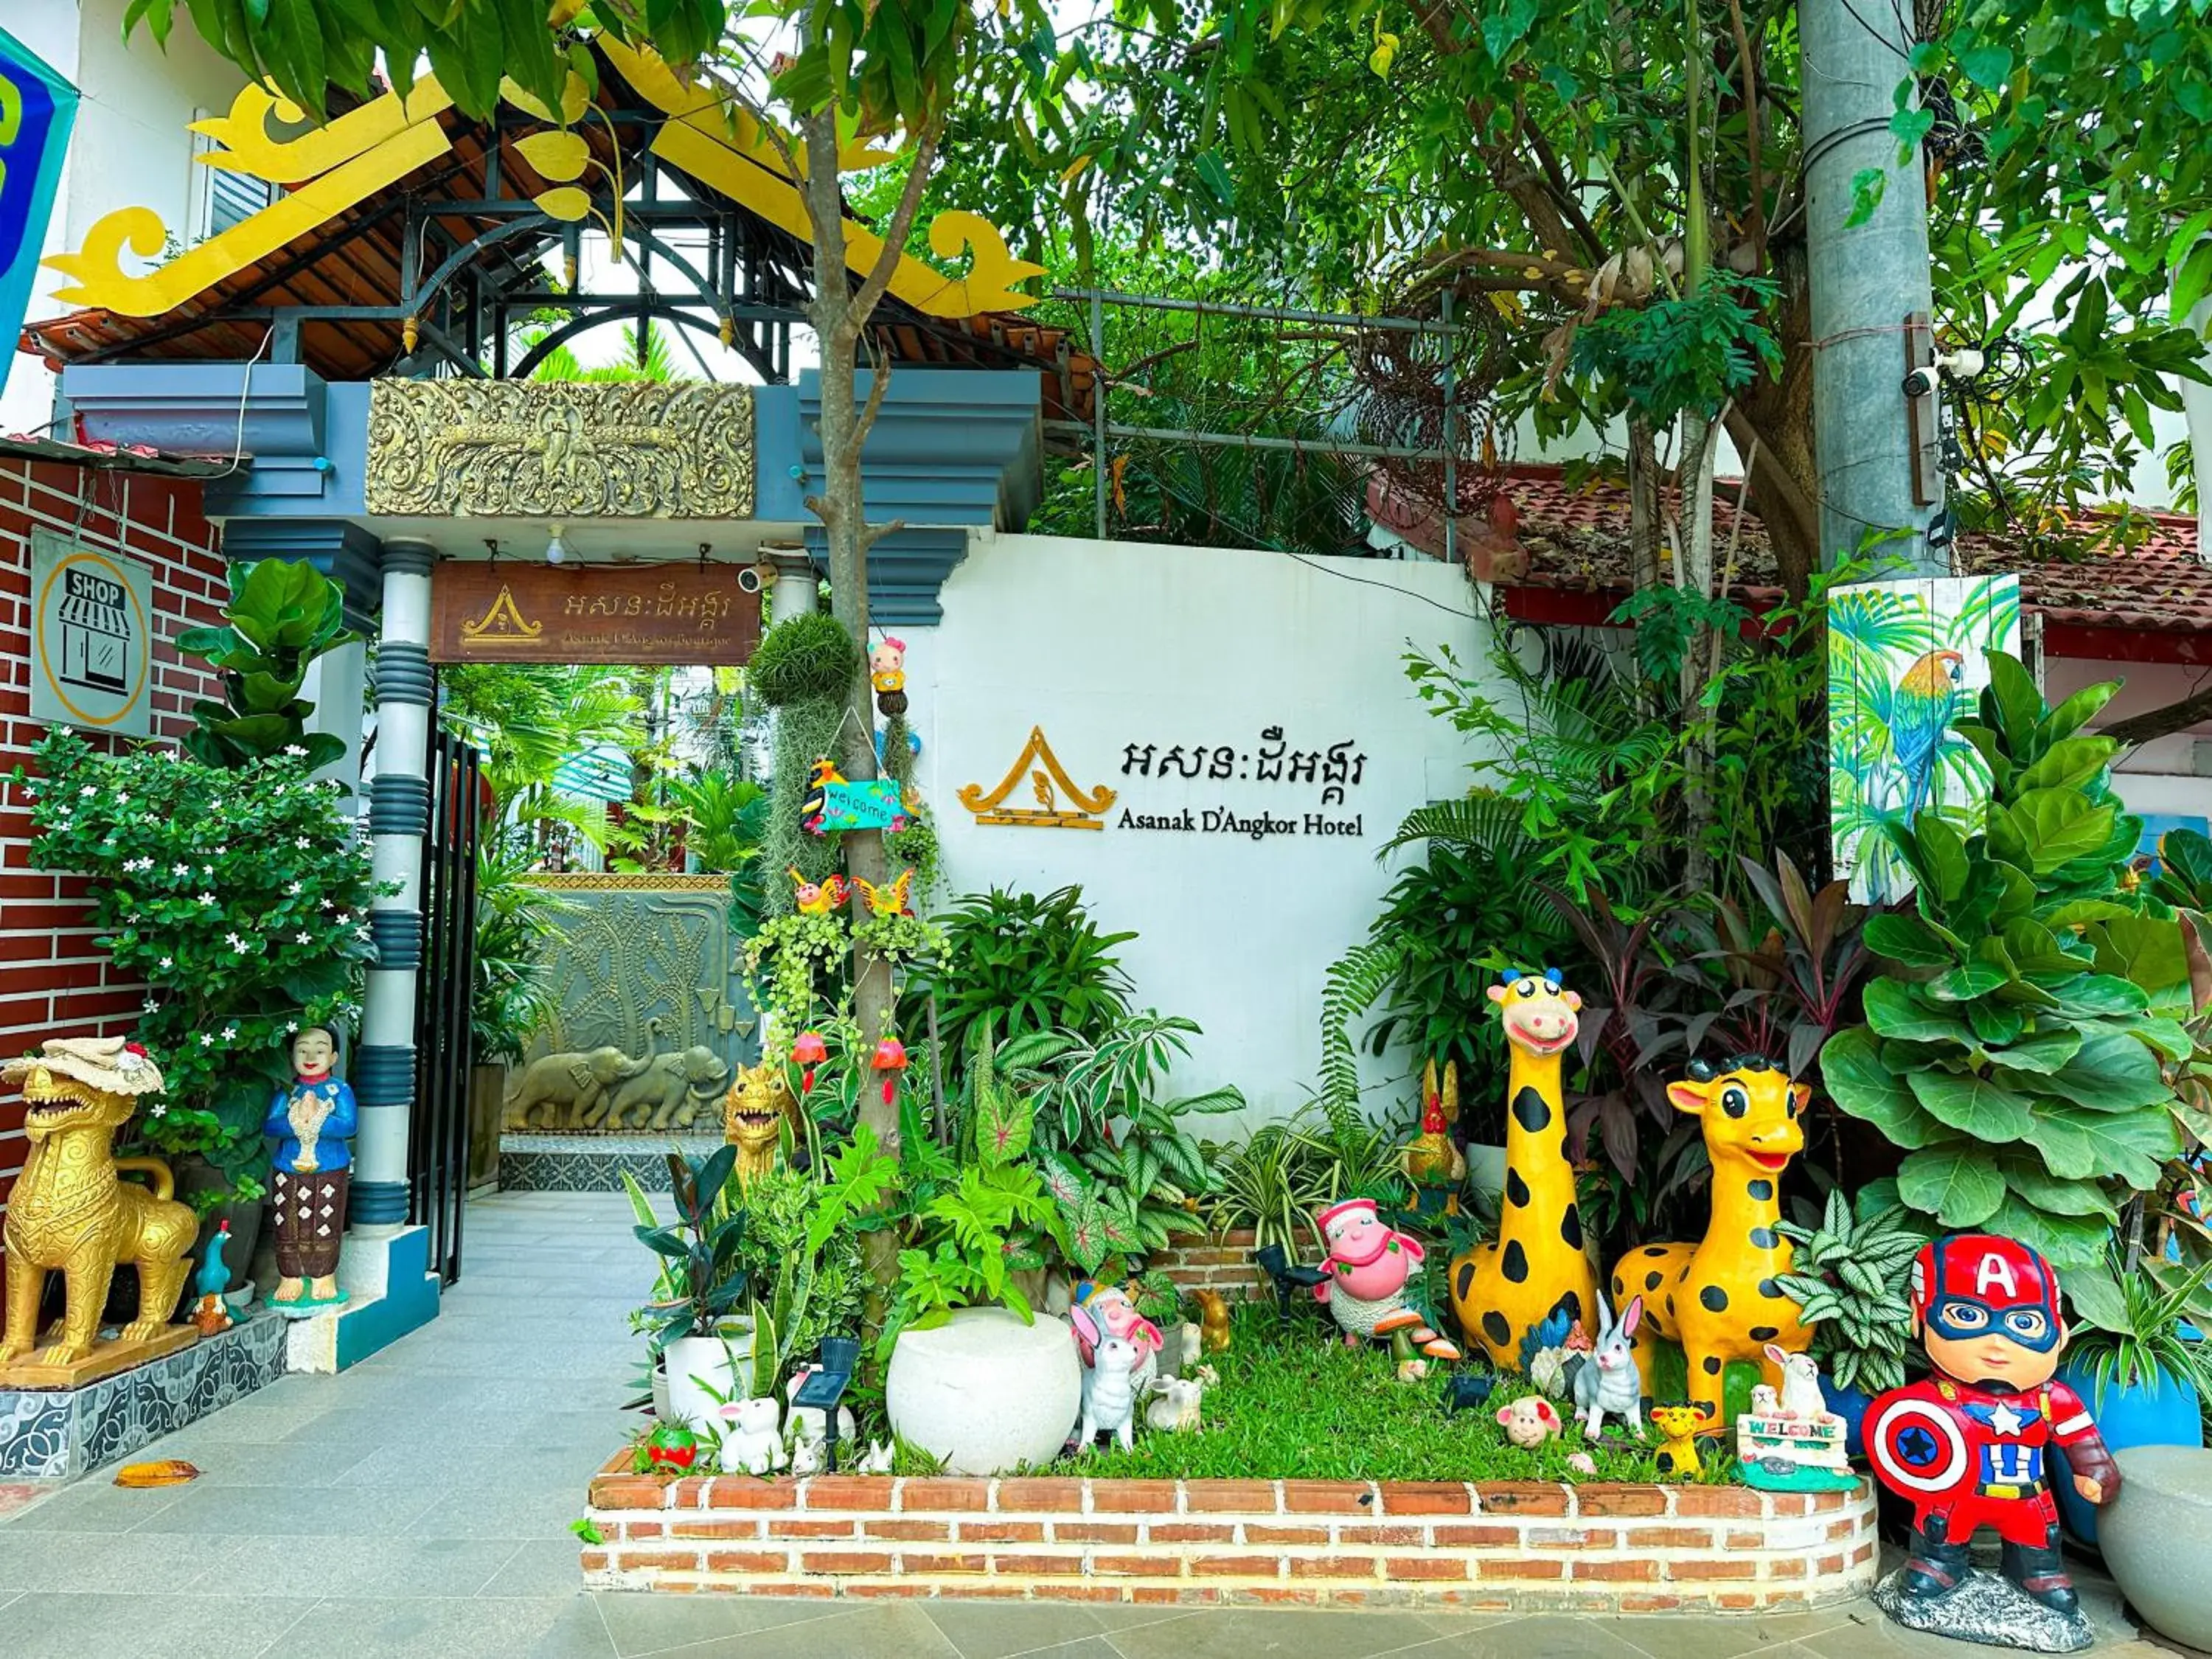 Property building in Asanak D'Angkor Boutique Hotel